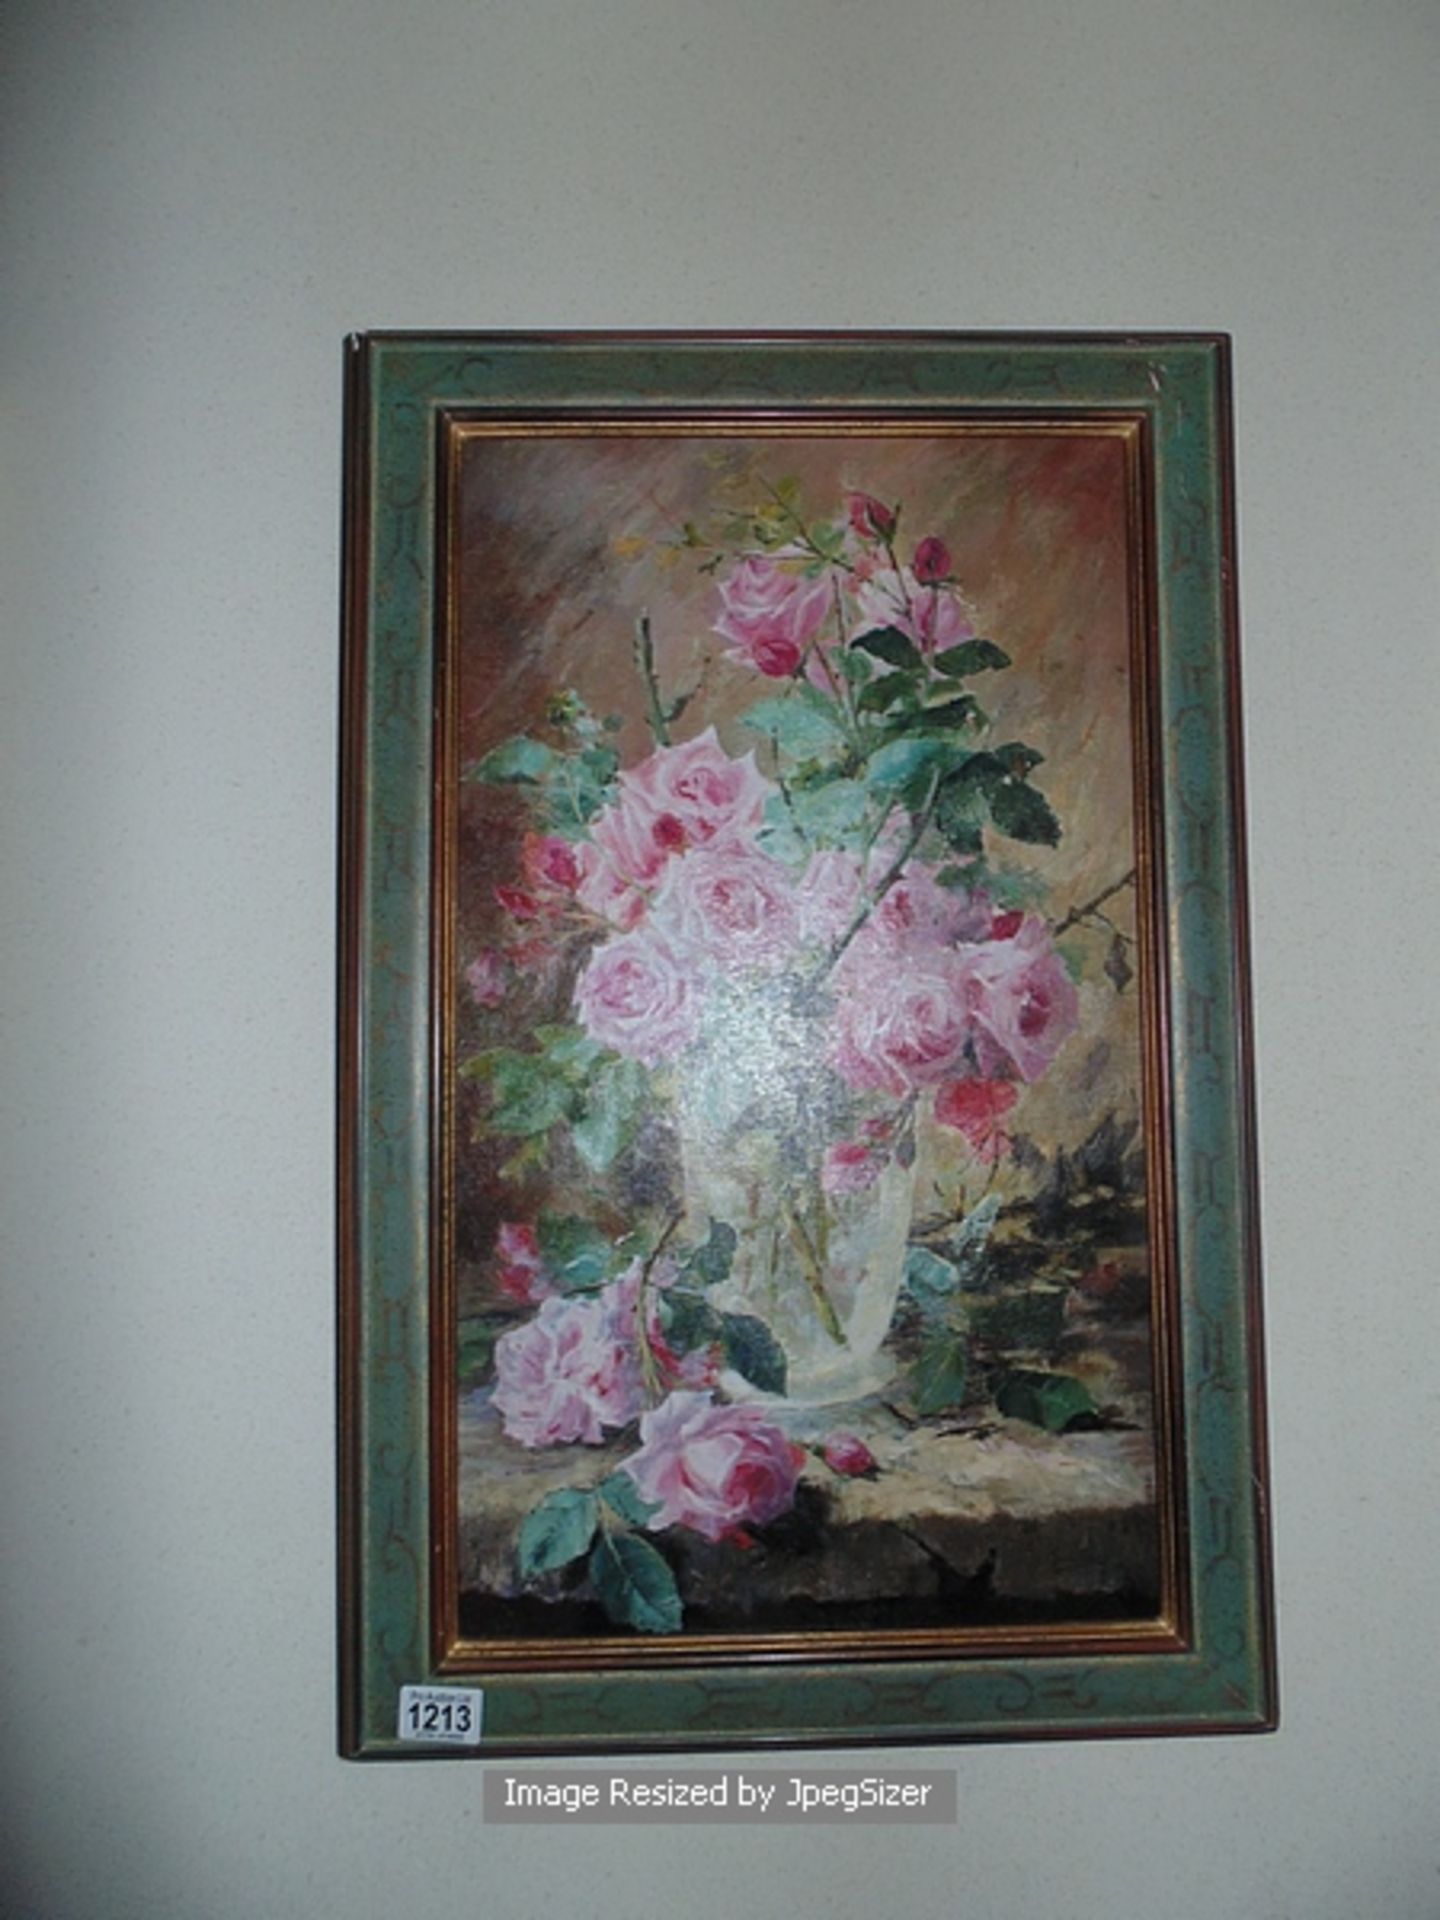 A still life floral painting on canvas wood frame 460mm x 700mm